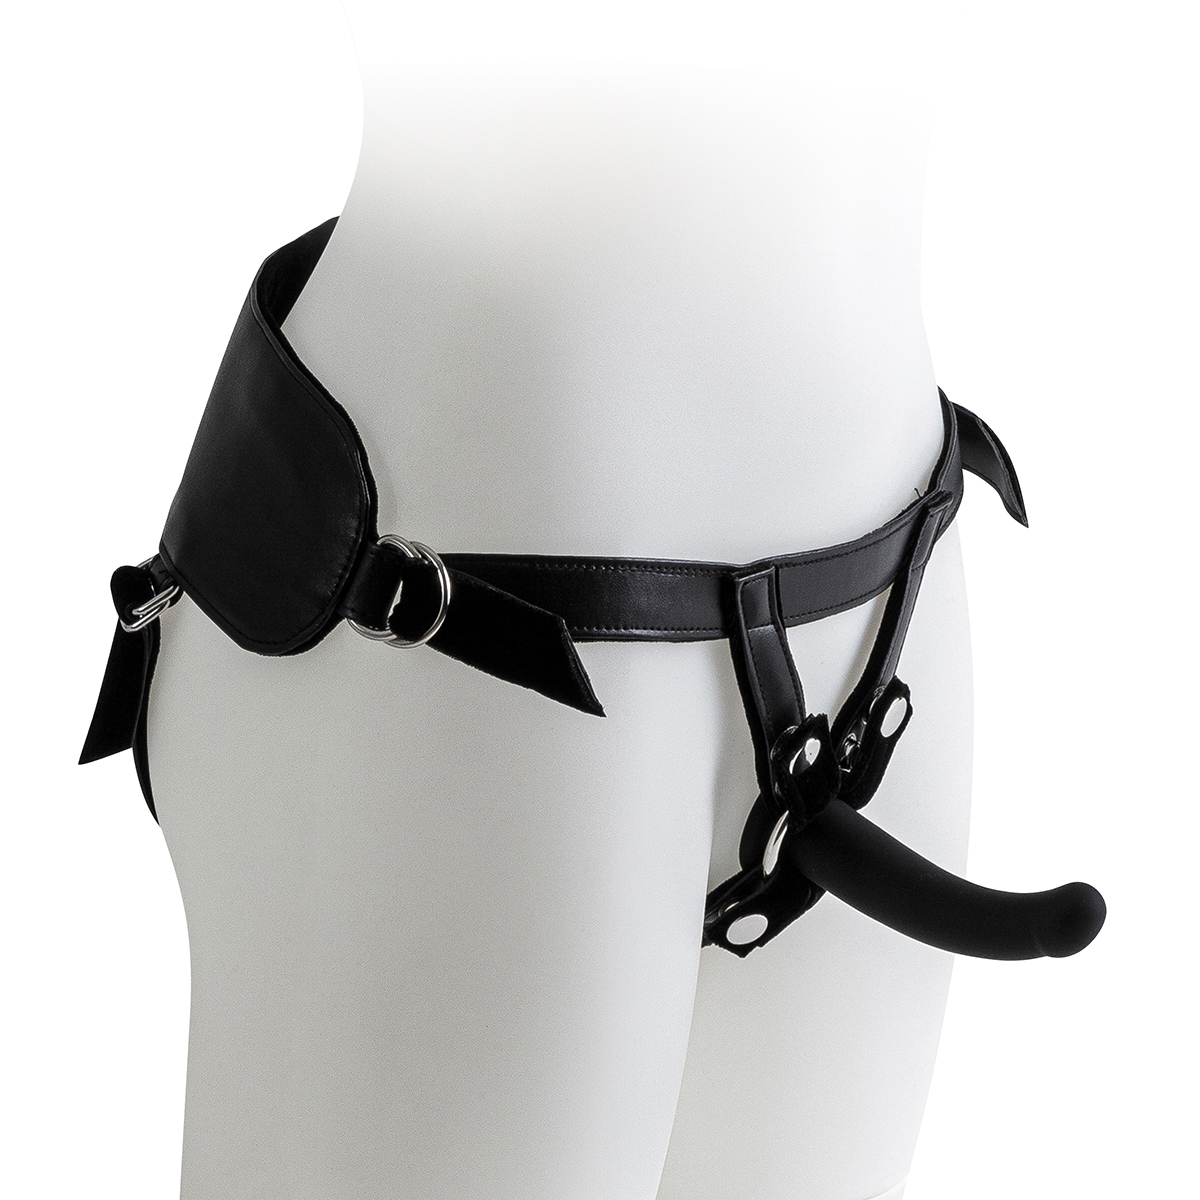 Harness with Black Dildo – Size S